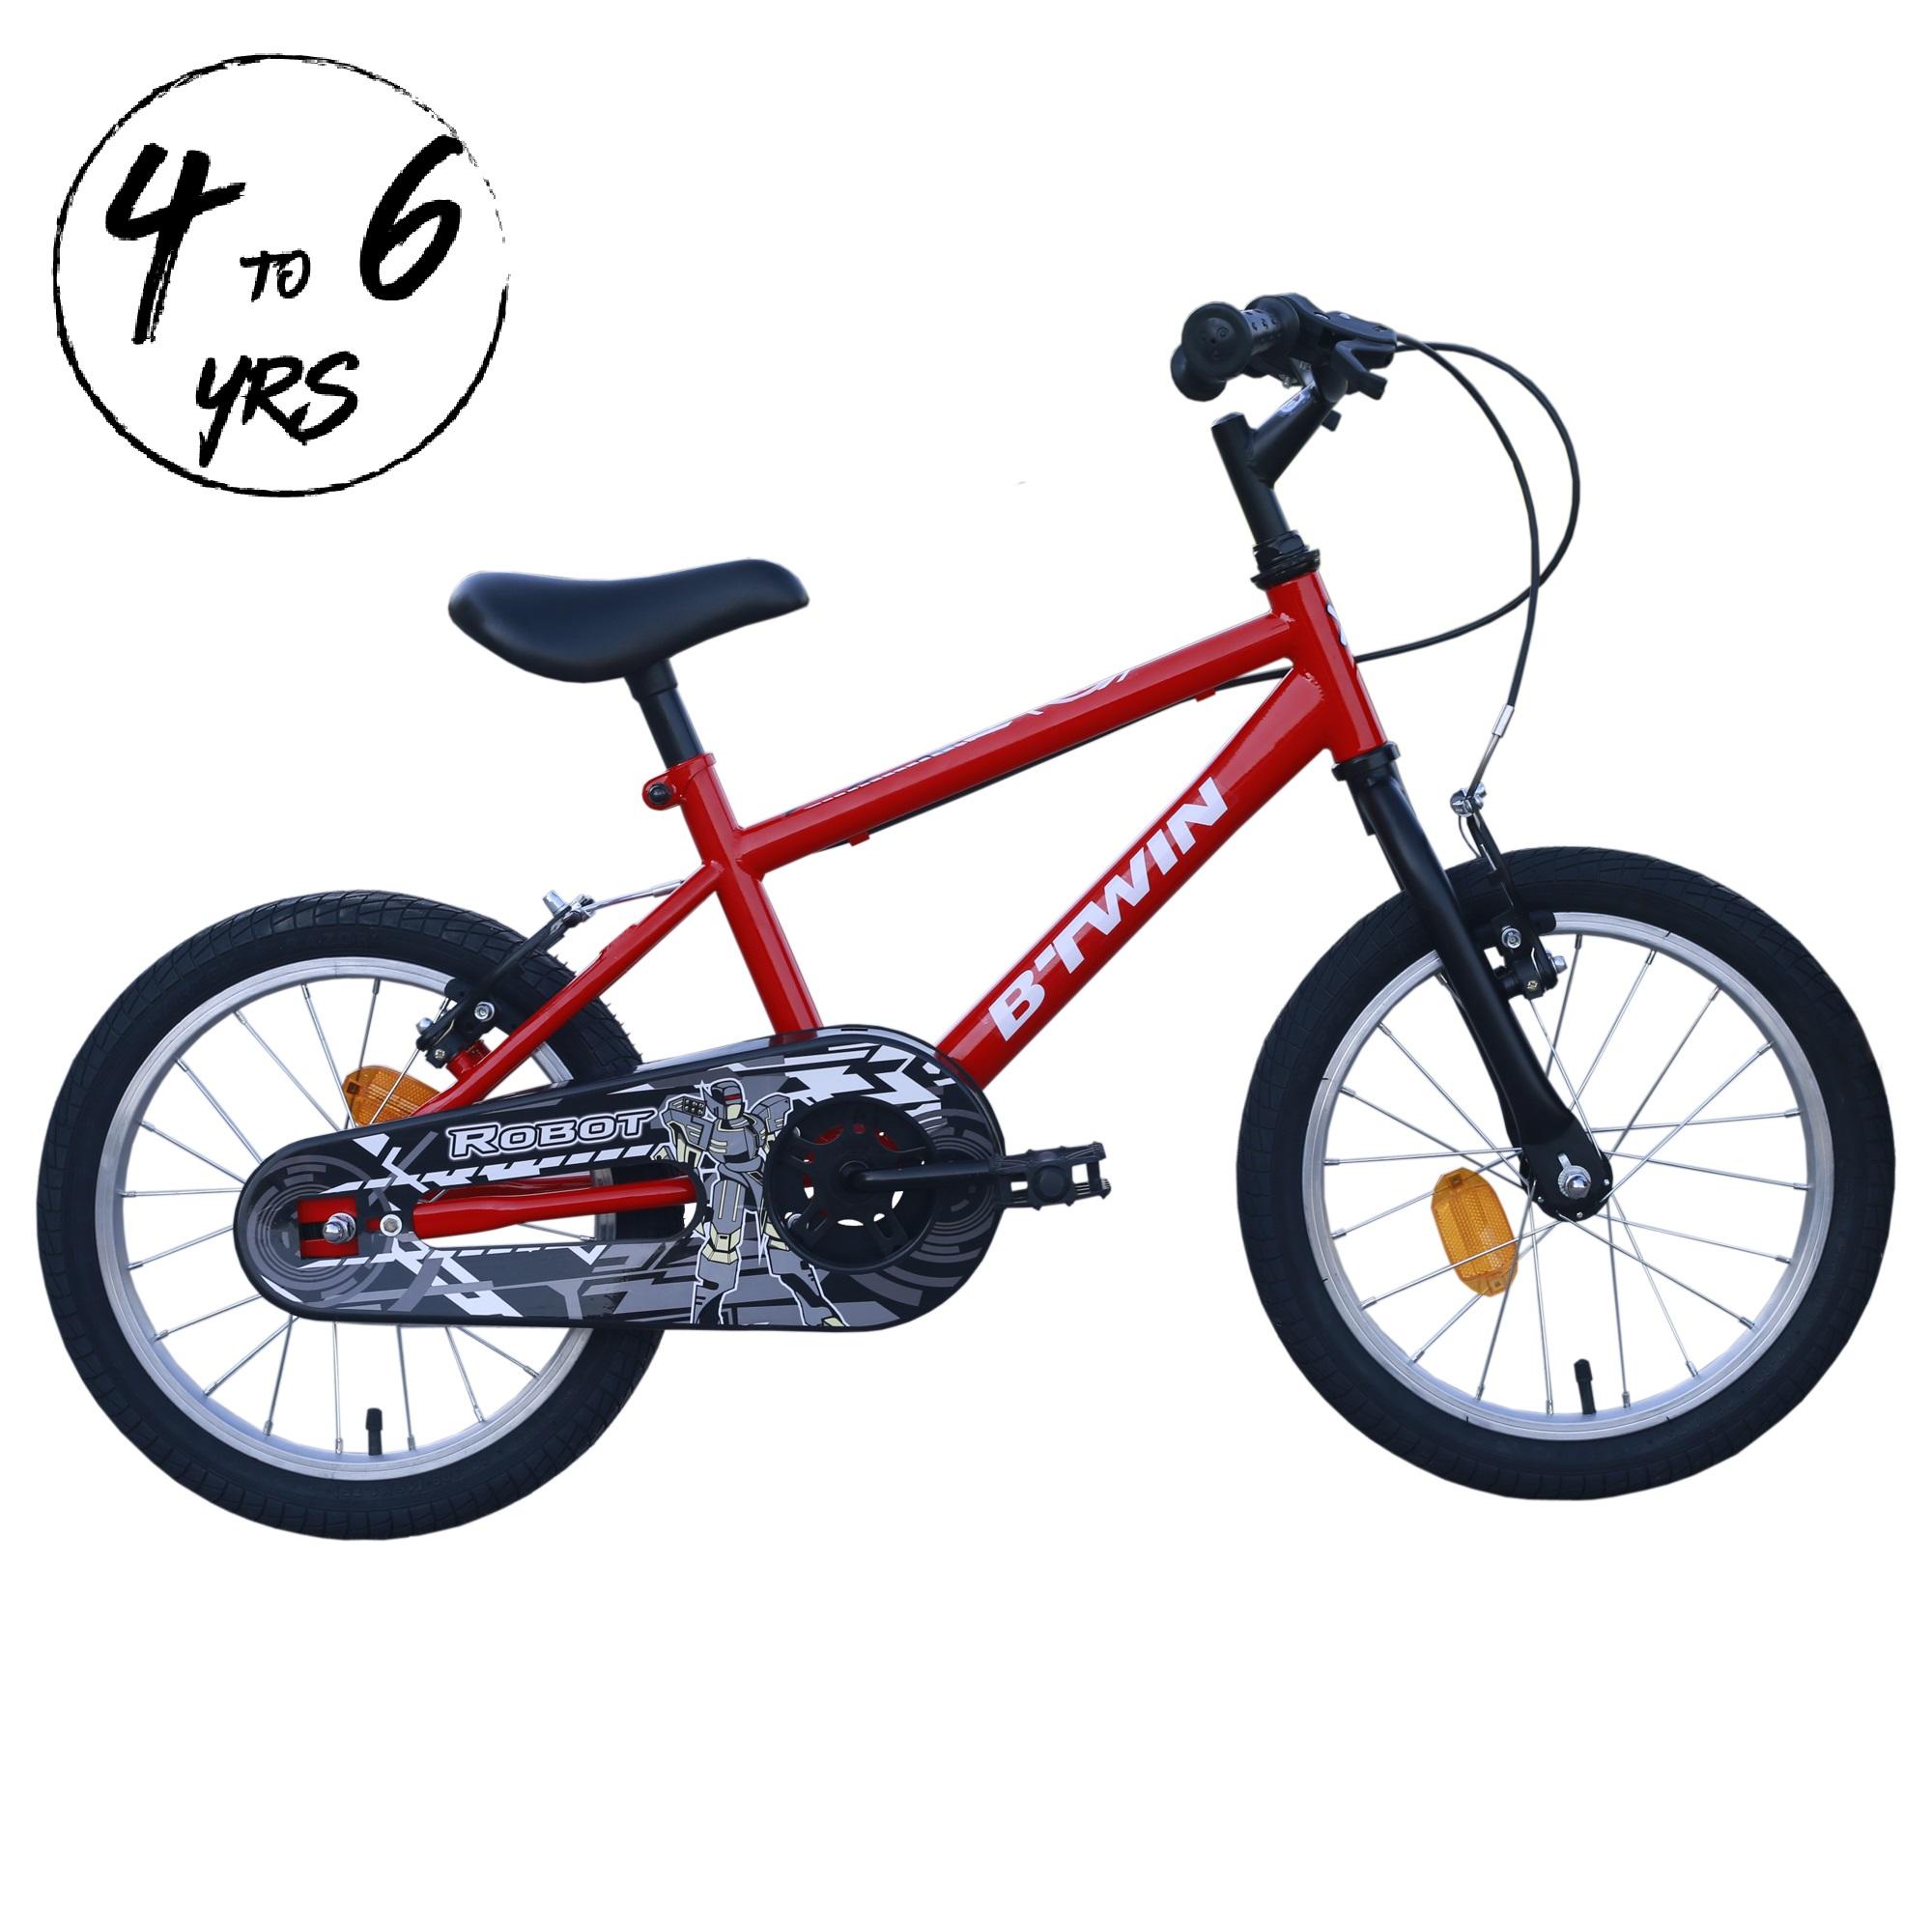 schnell cycle for kids